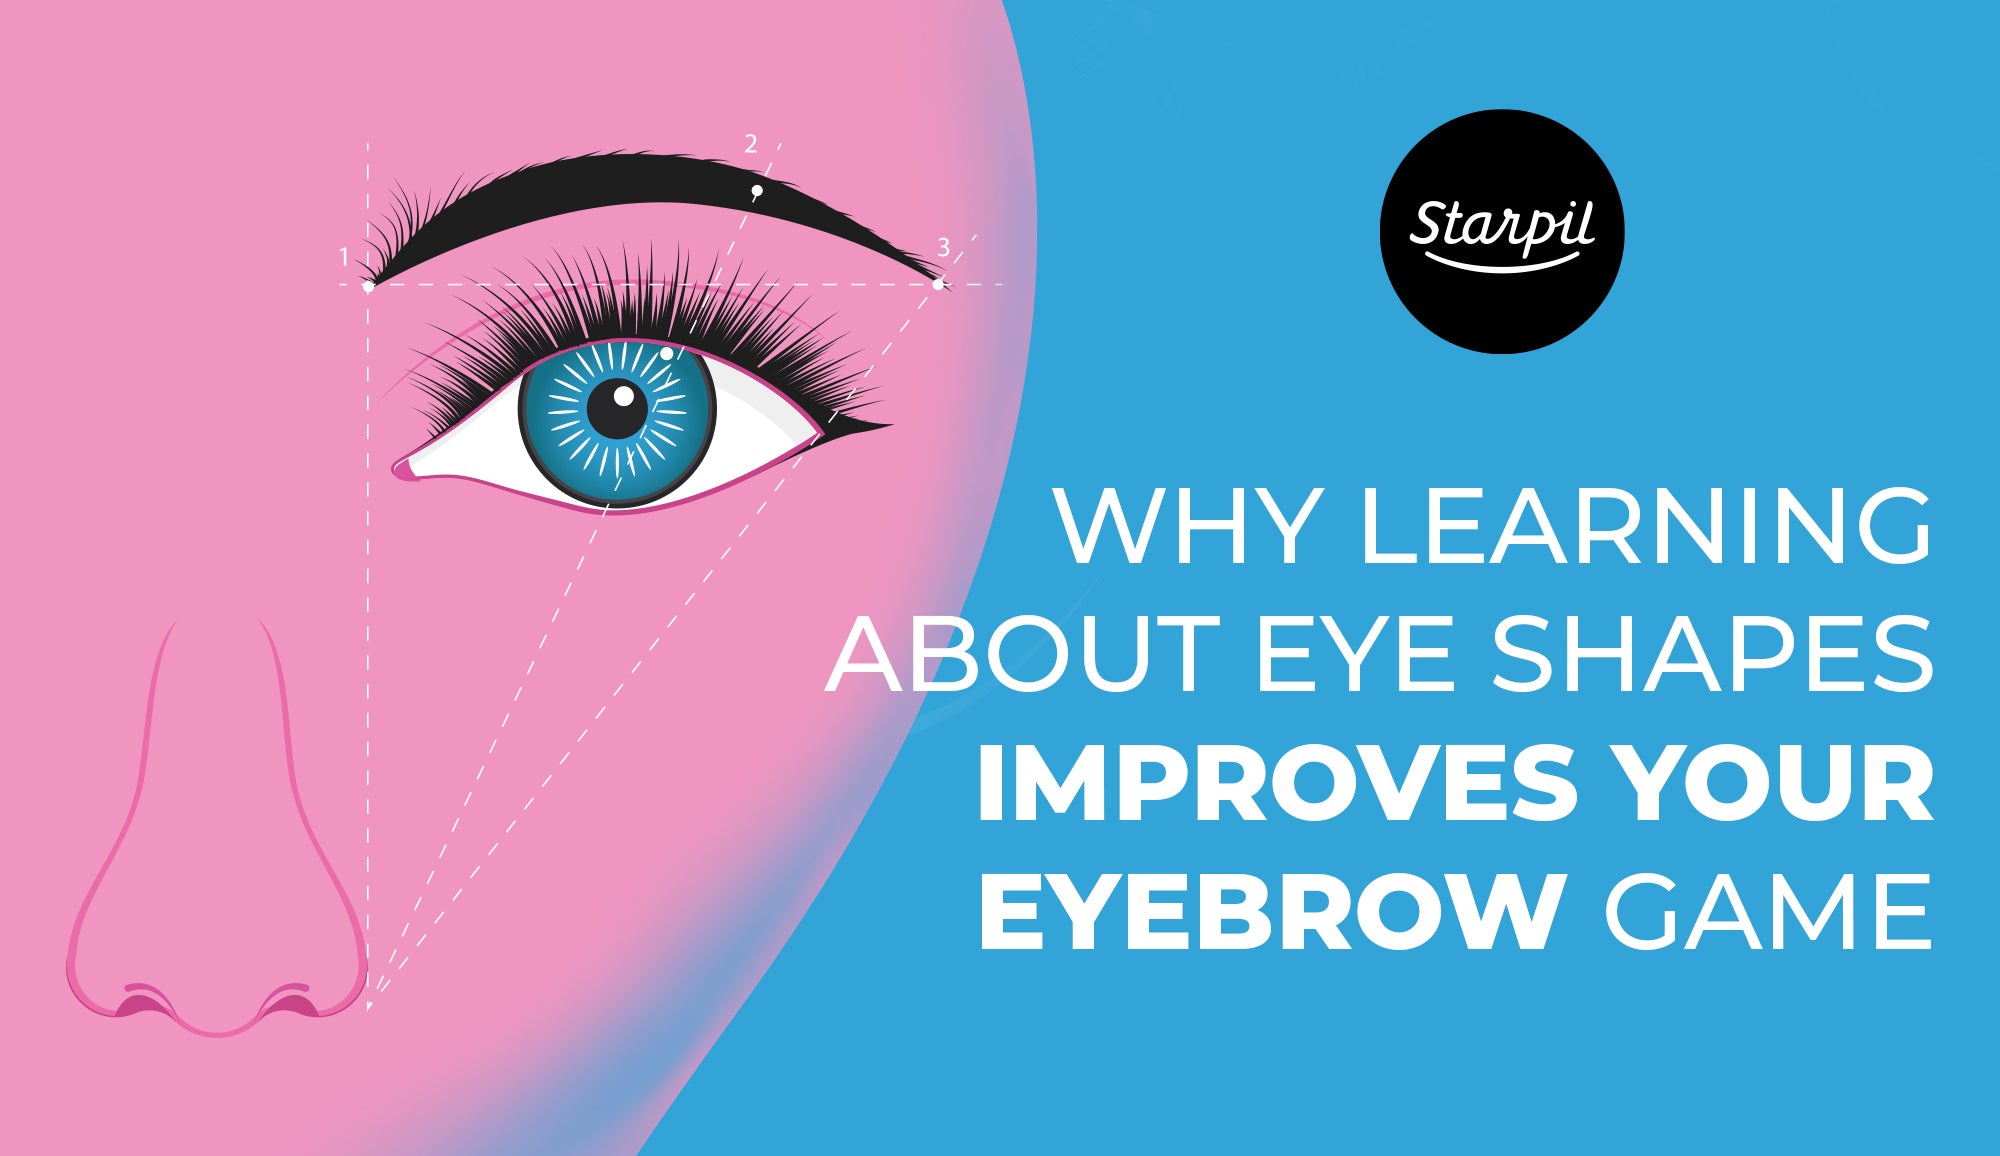 Why Learning About Eye Shapes Improves Your Eyebrow Game